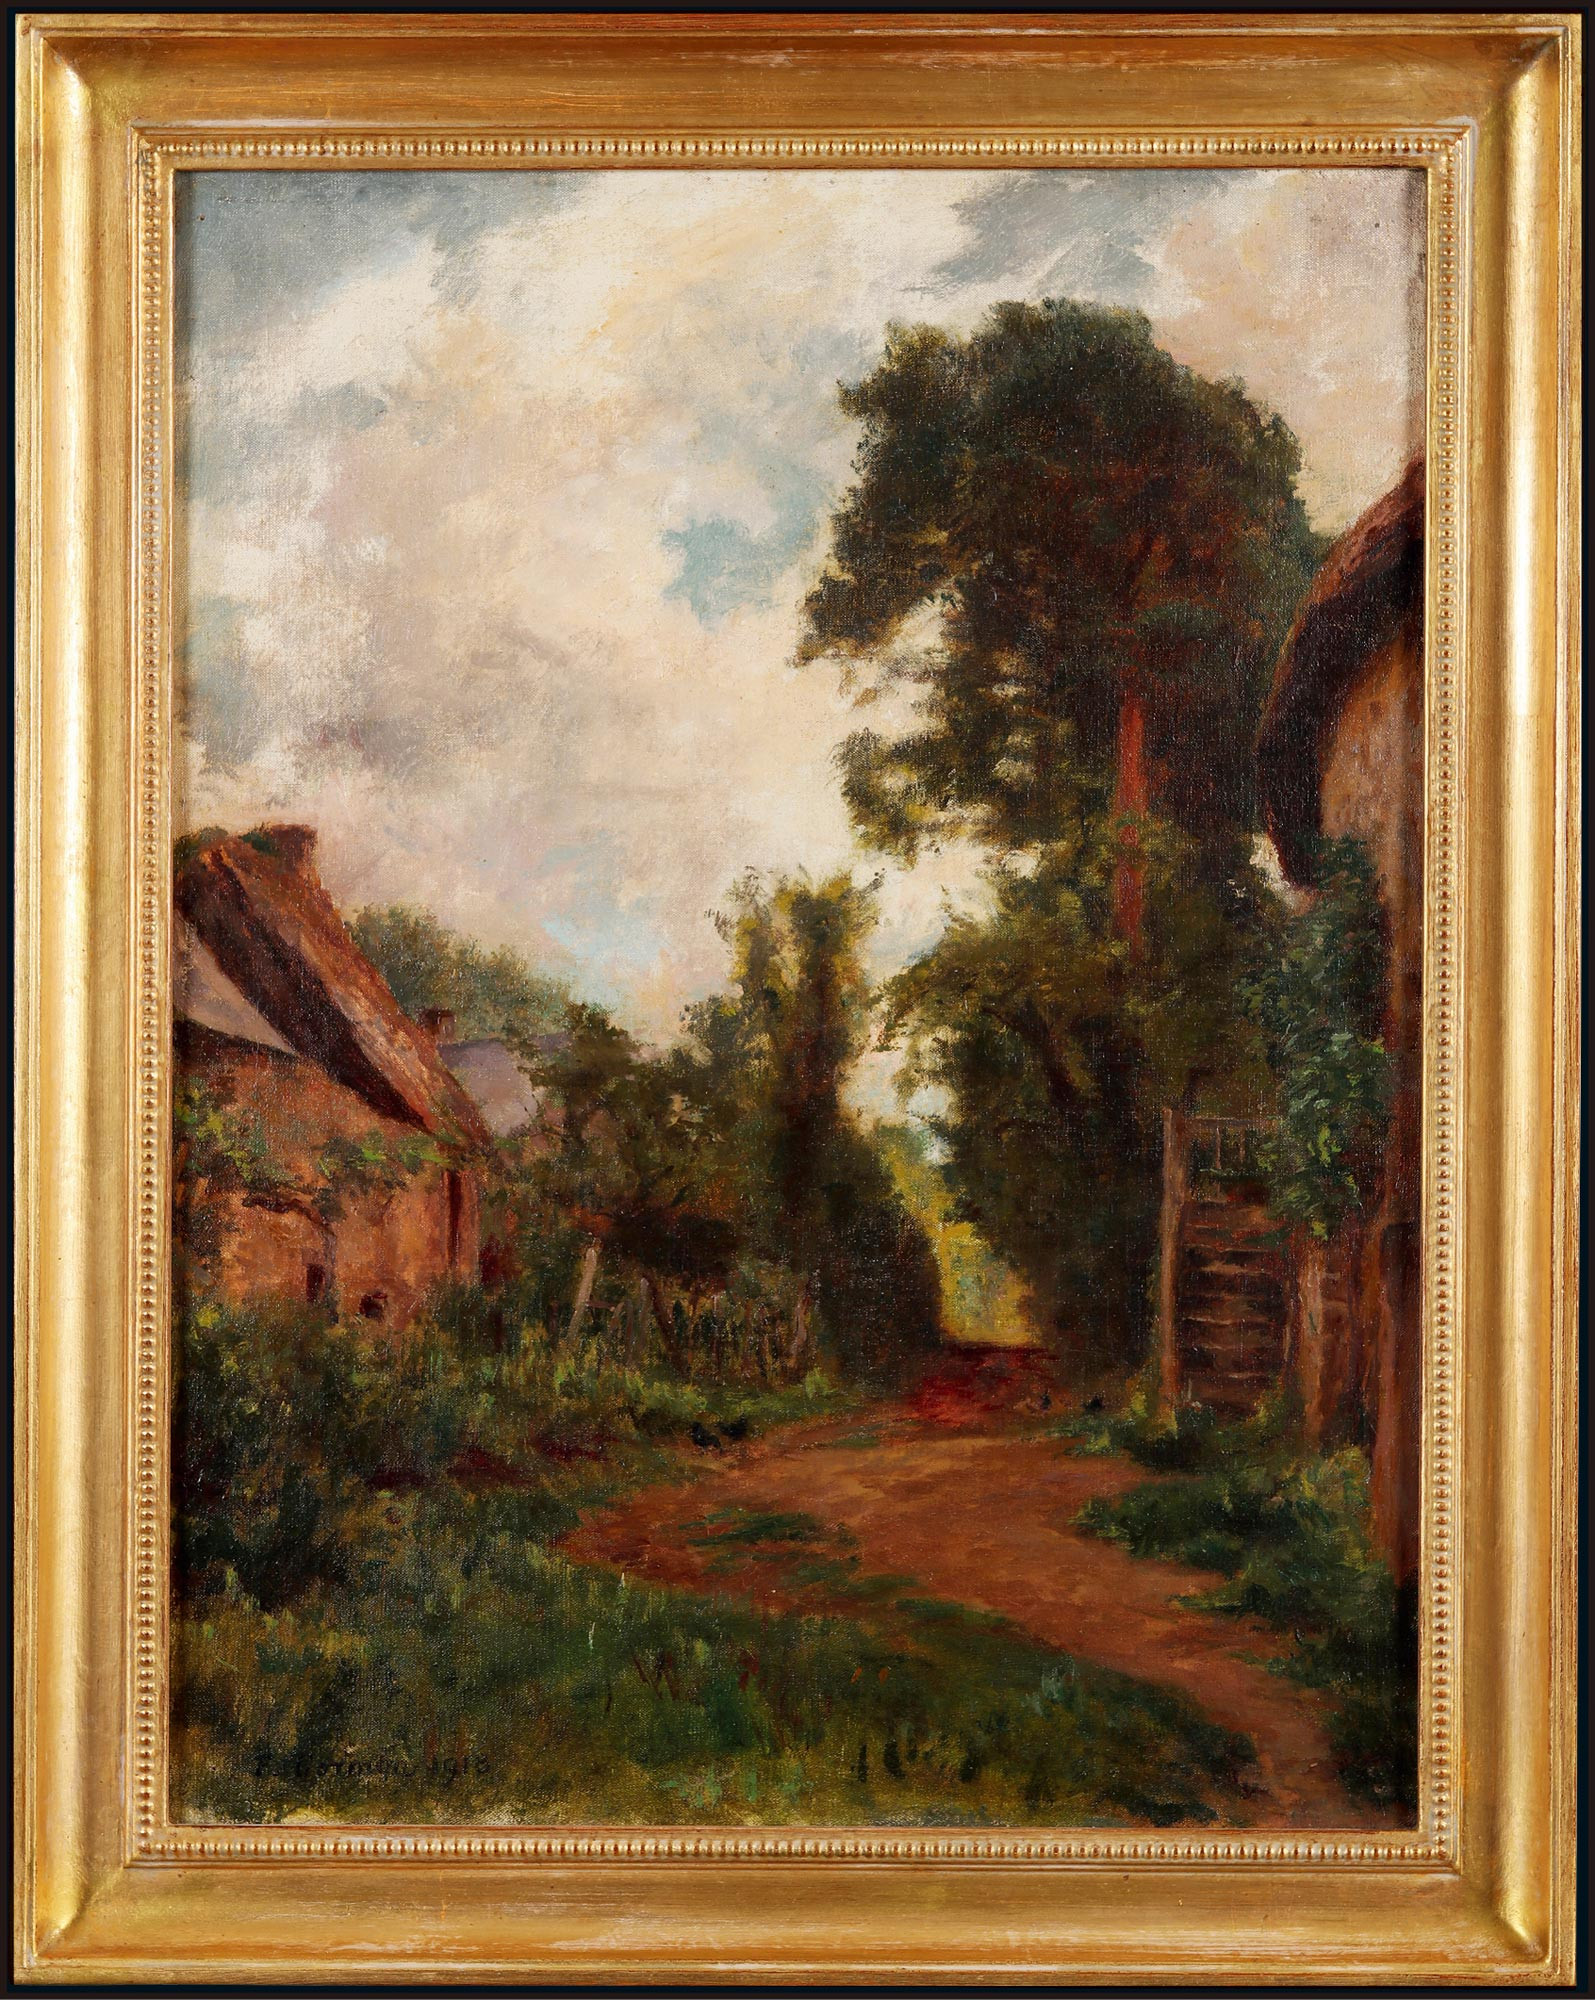 The oil painting “Village Lane” by Fernand Cormon, a famous French painter and mentor of Xu Beihong and Lin Fengmian, with certificate